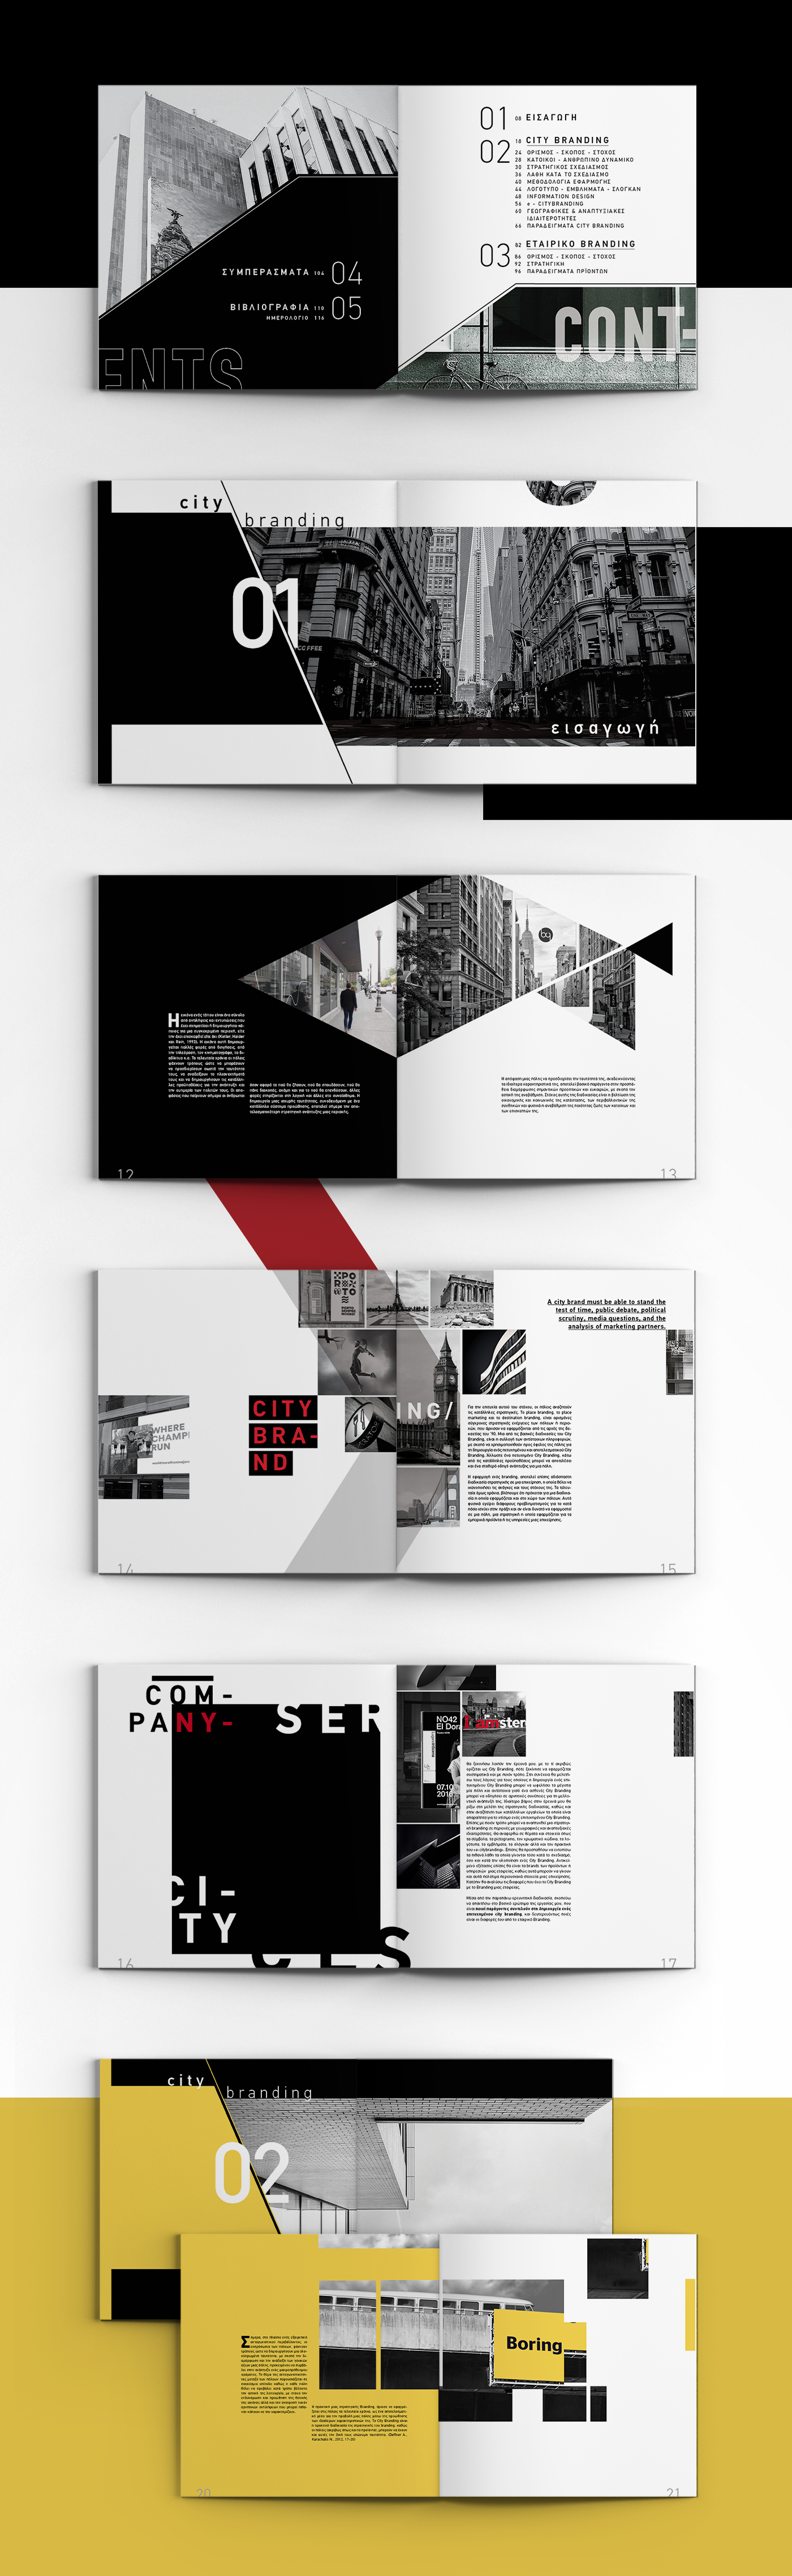 book design book Layout City branding graphic design  typesetting template magazine cover editorial